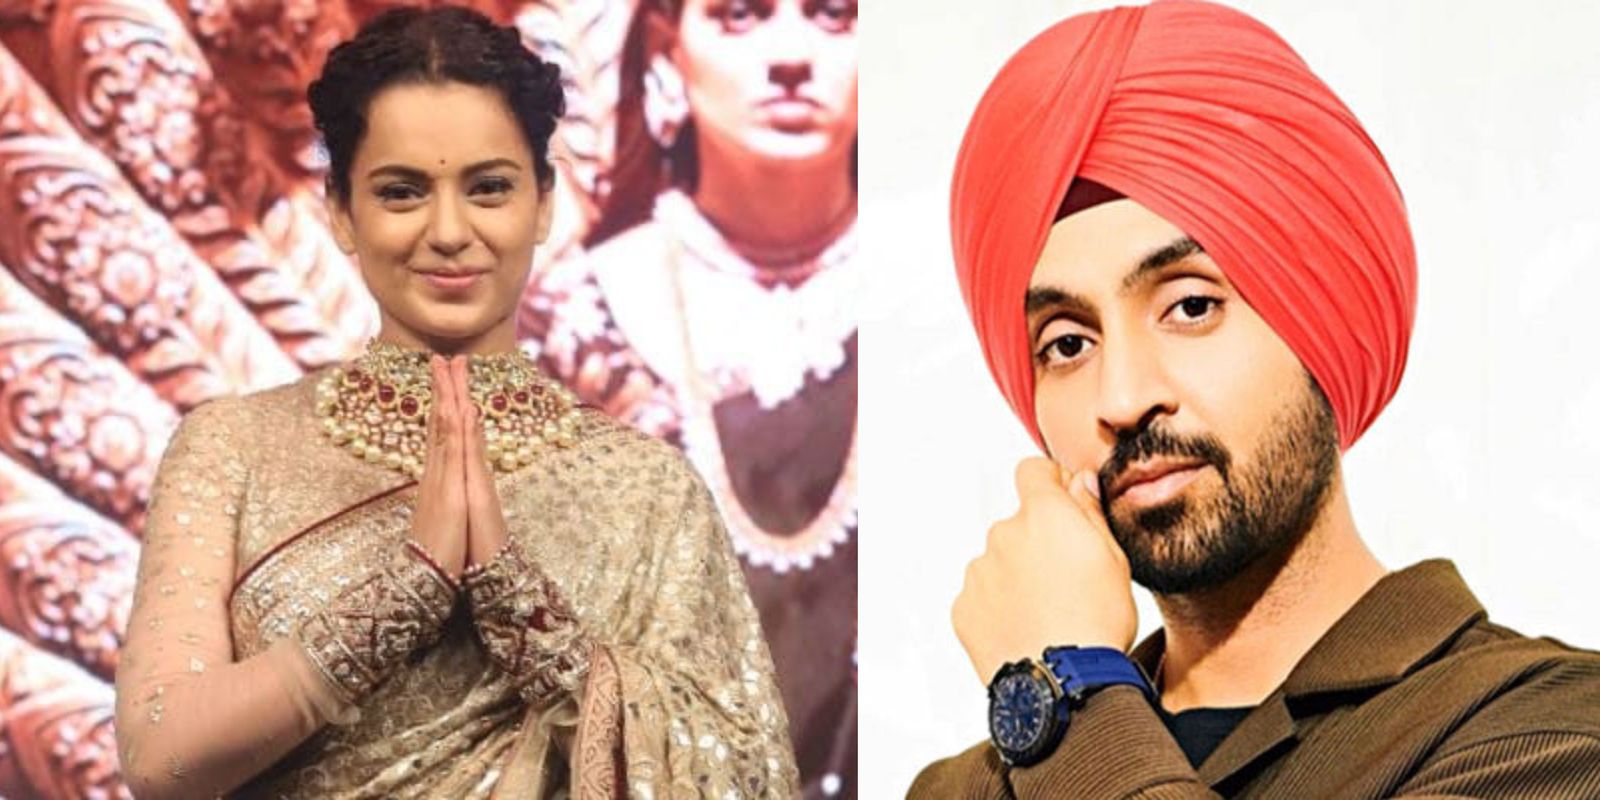 Diljit Dosanjh Hits Back At Kangana Ranaut For 'Disappeared' Comment, Asks If She Is The Authority